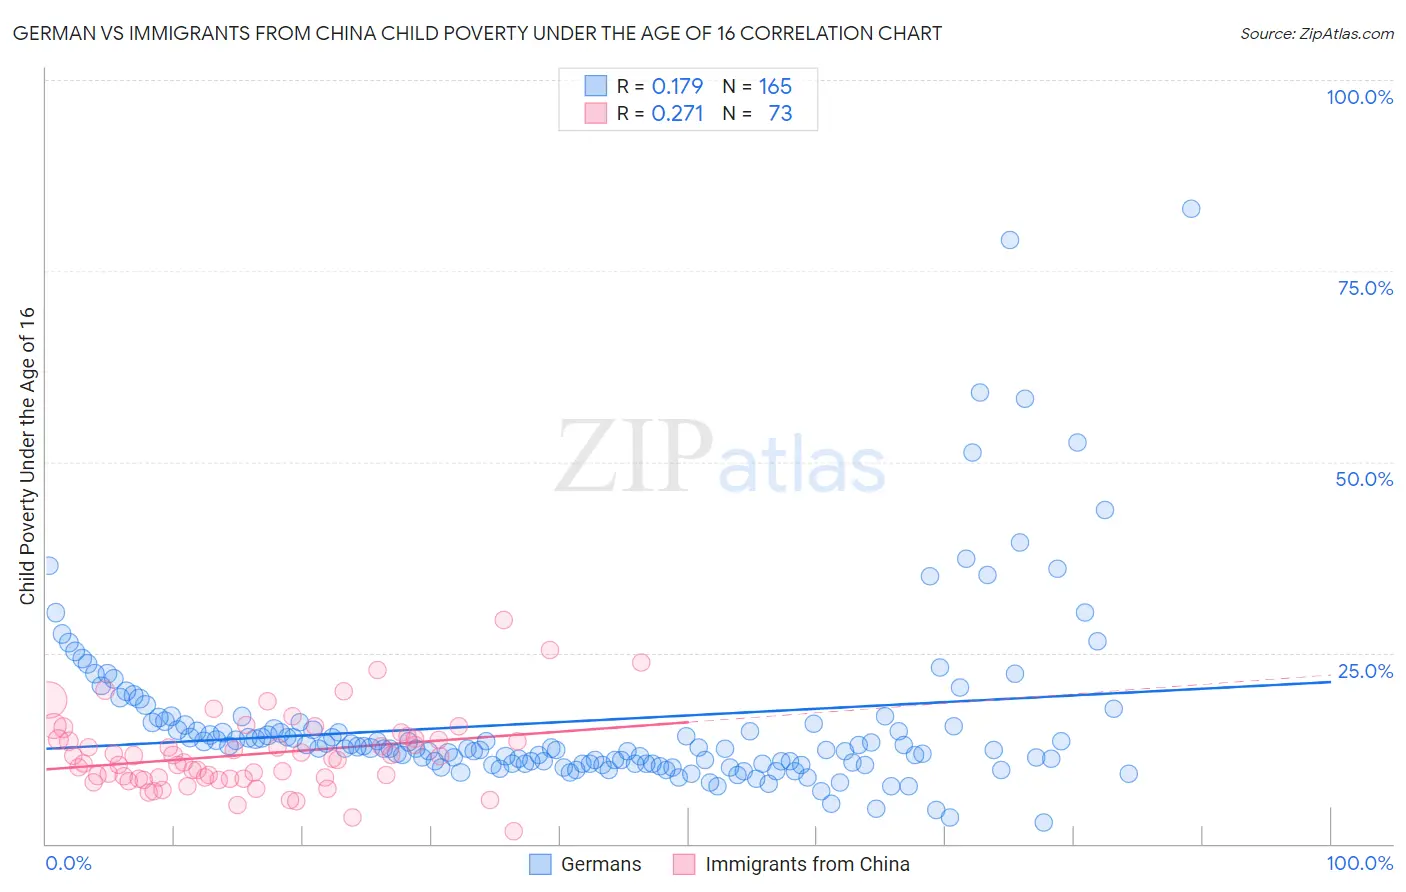 German vs Immigrants from China Child Poverty Under the Age of 16